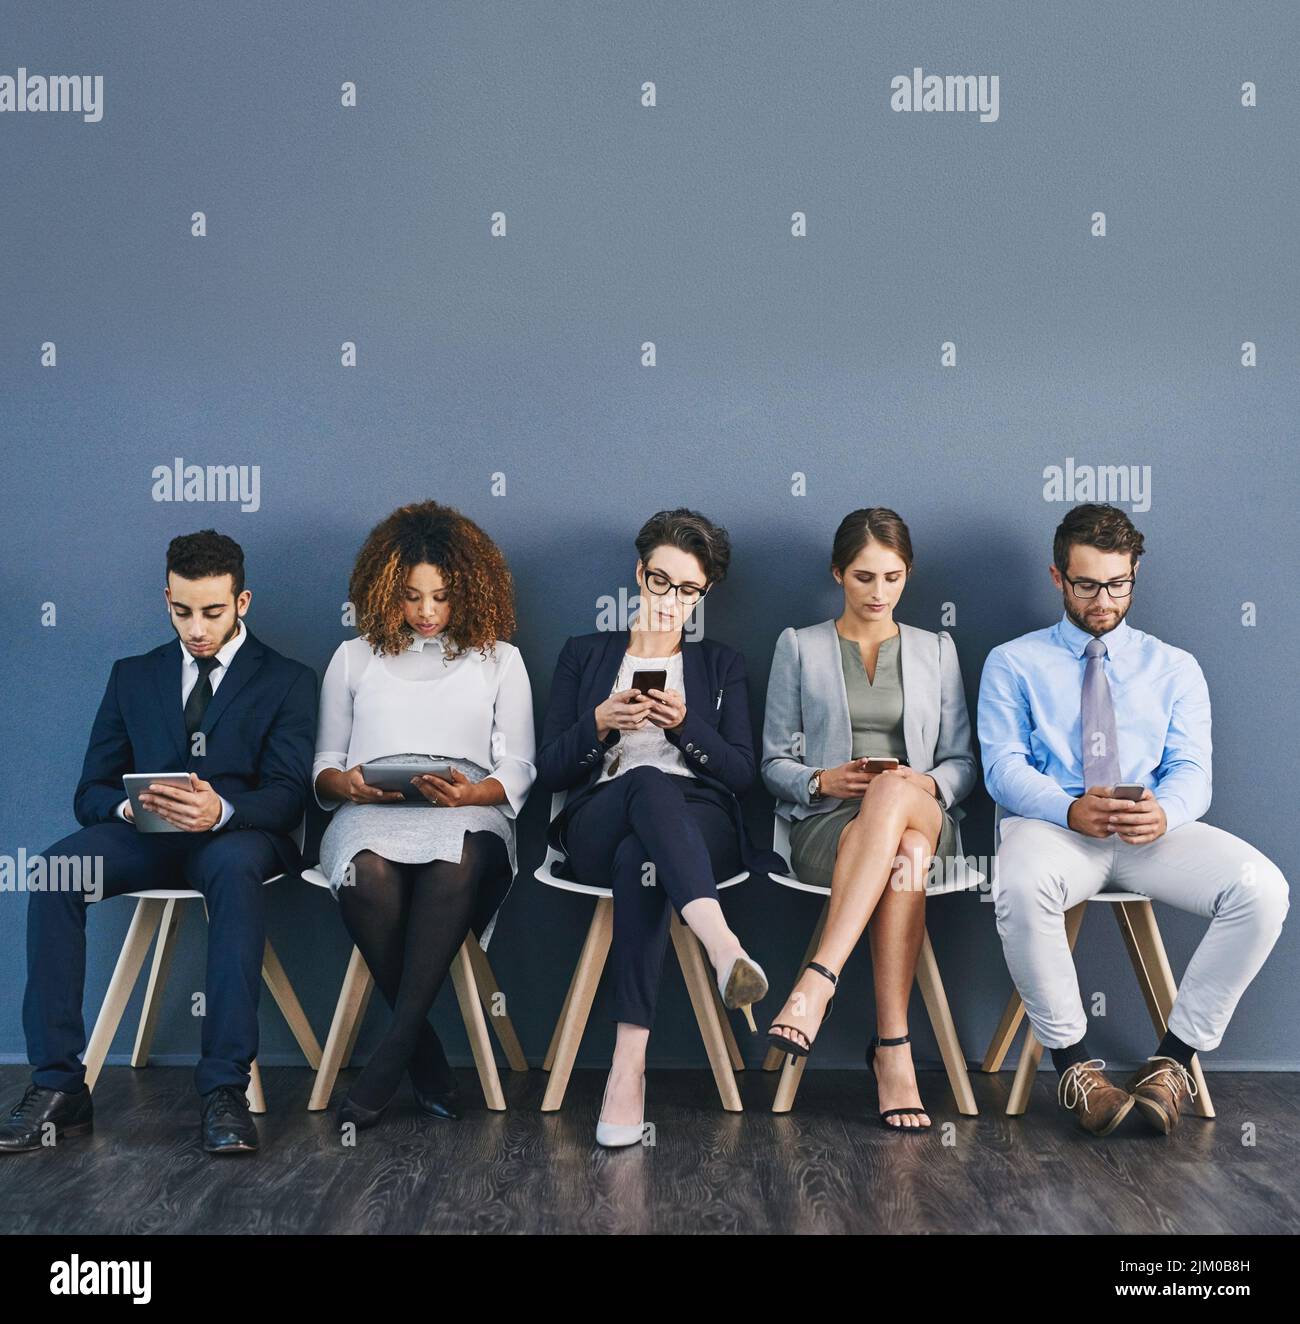 Group of business people at a job interview at a small startup company with copy space. Businesspeople sitting and waiting in line for a meeting with Stock Photo